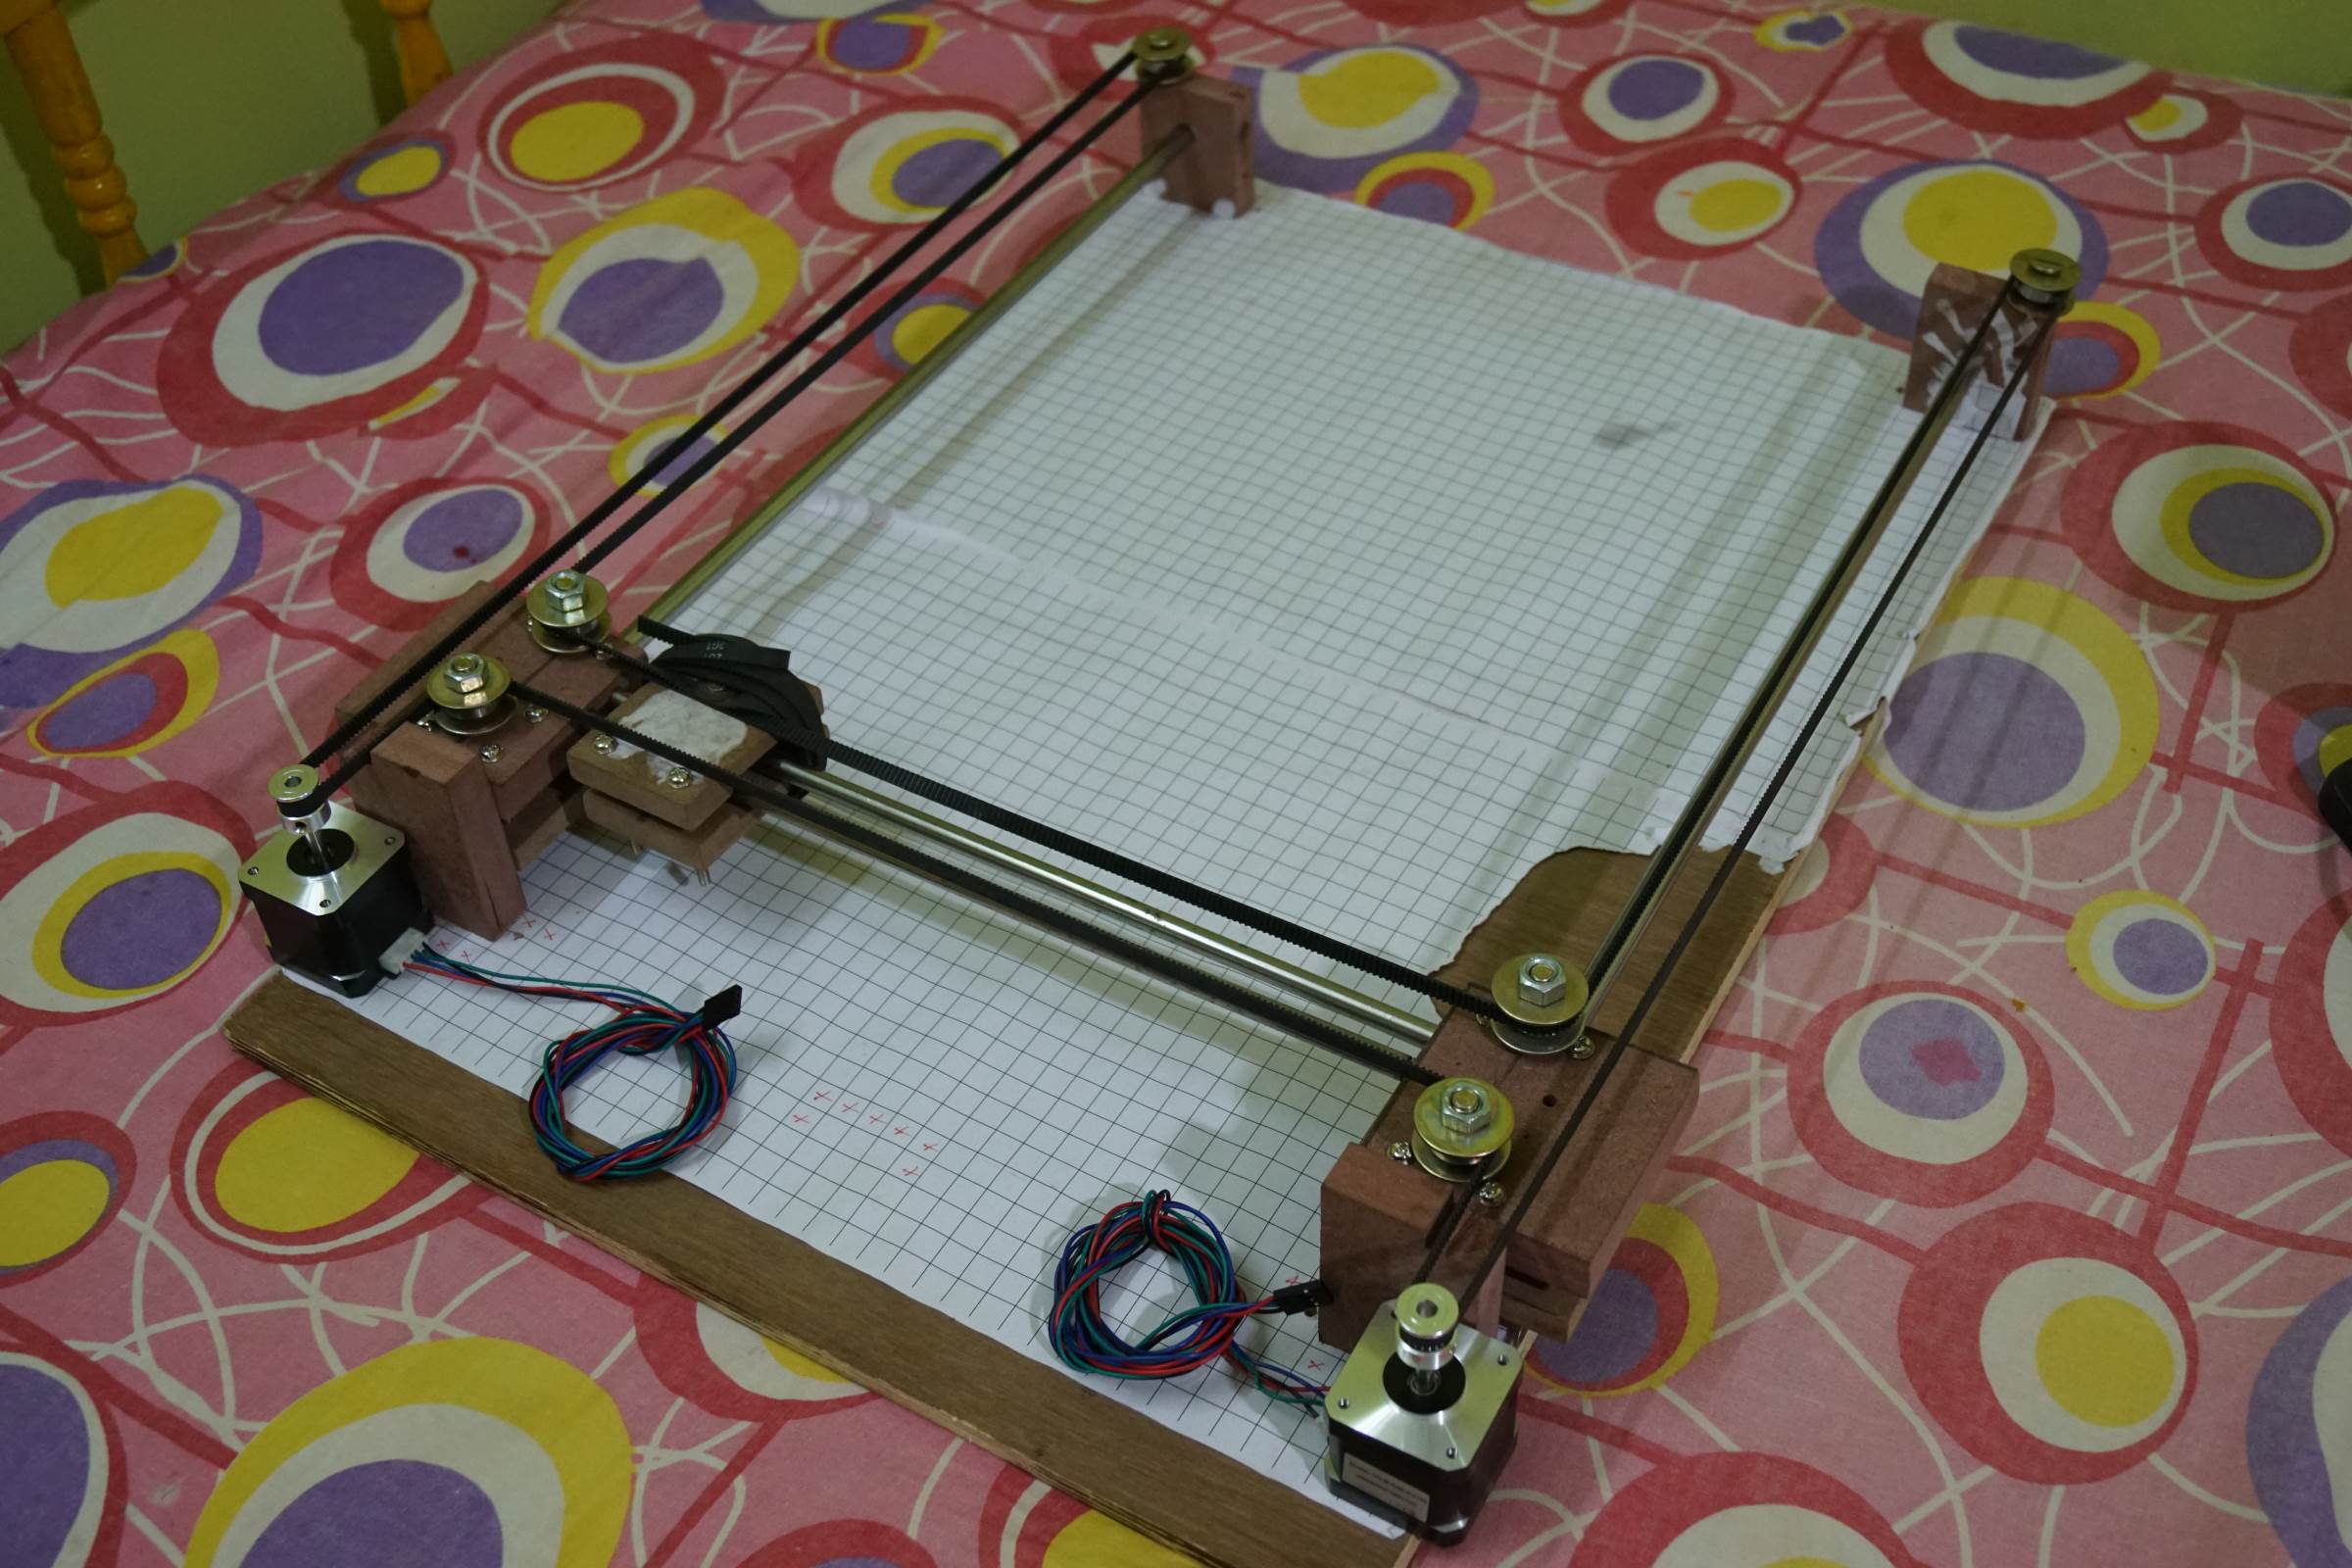 Belt Assembly of Arduino Drawing Robot